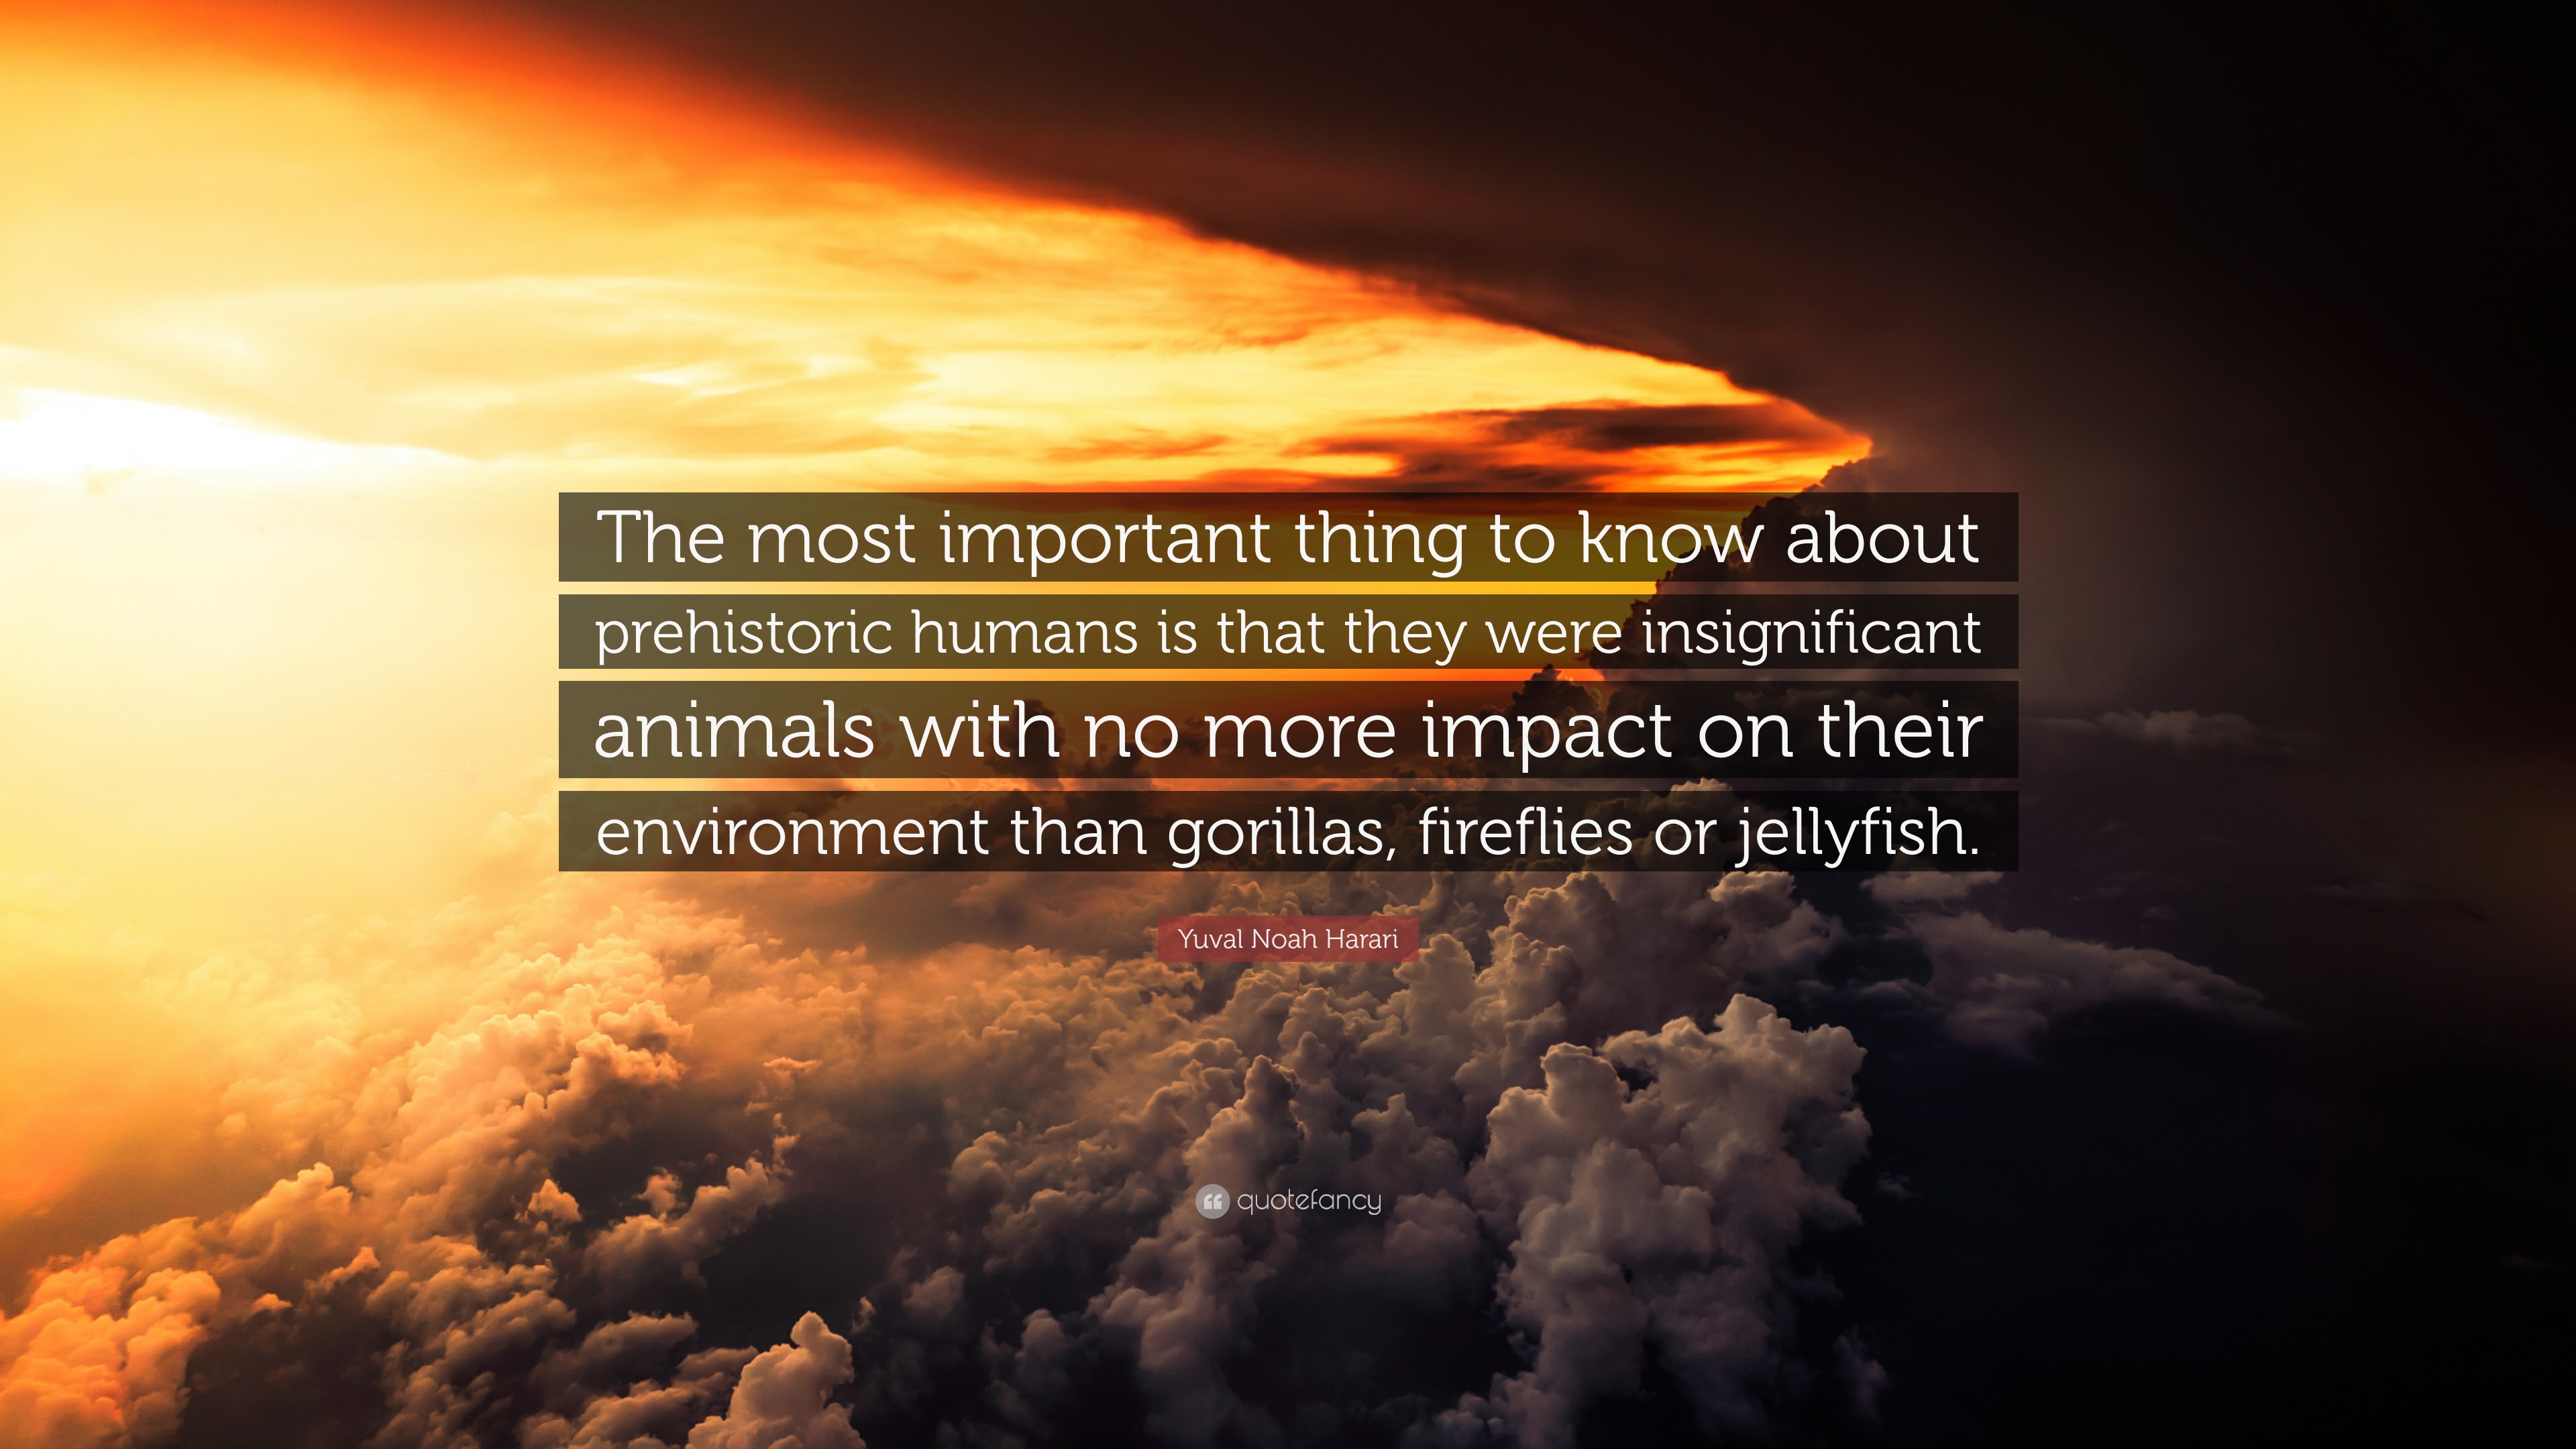 Yuval Noah Harari Quote: “The most important thing to know about  prehistoric humans is that they were insignificant animals with no more  impact on...”